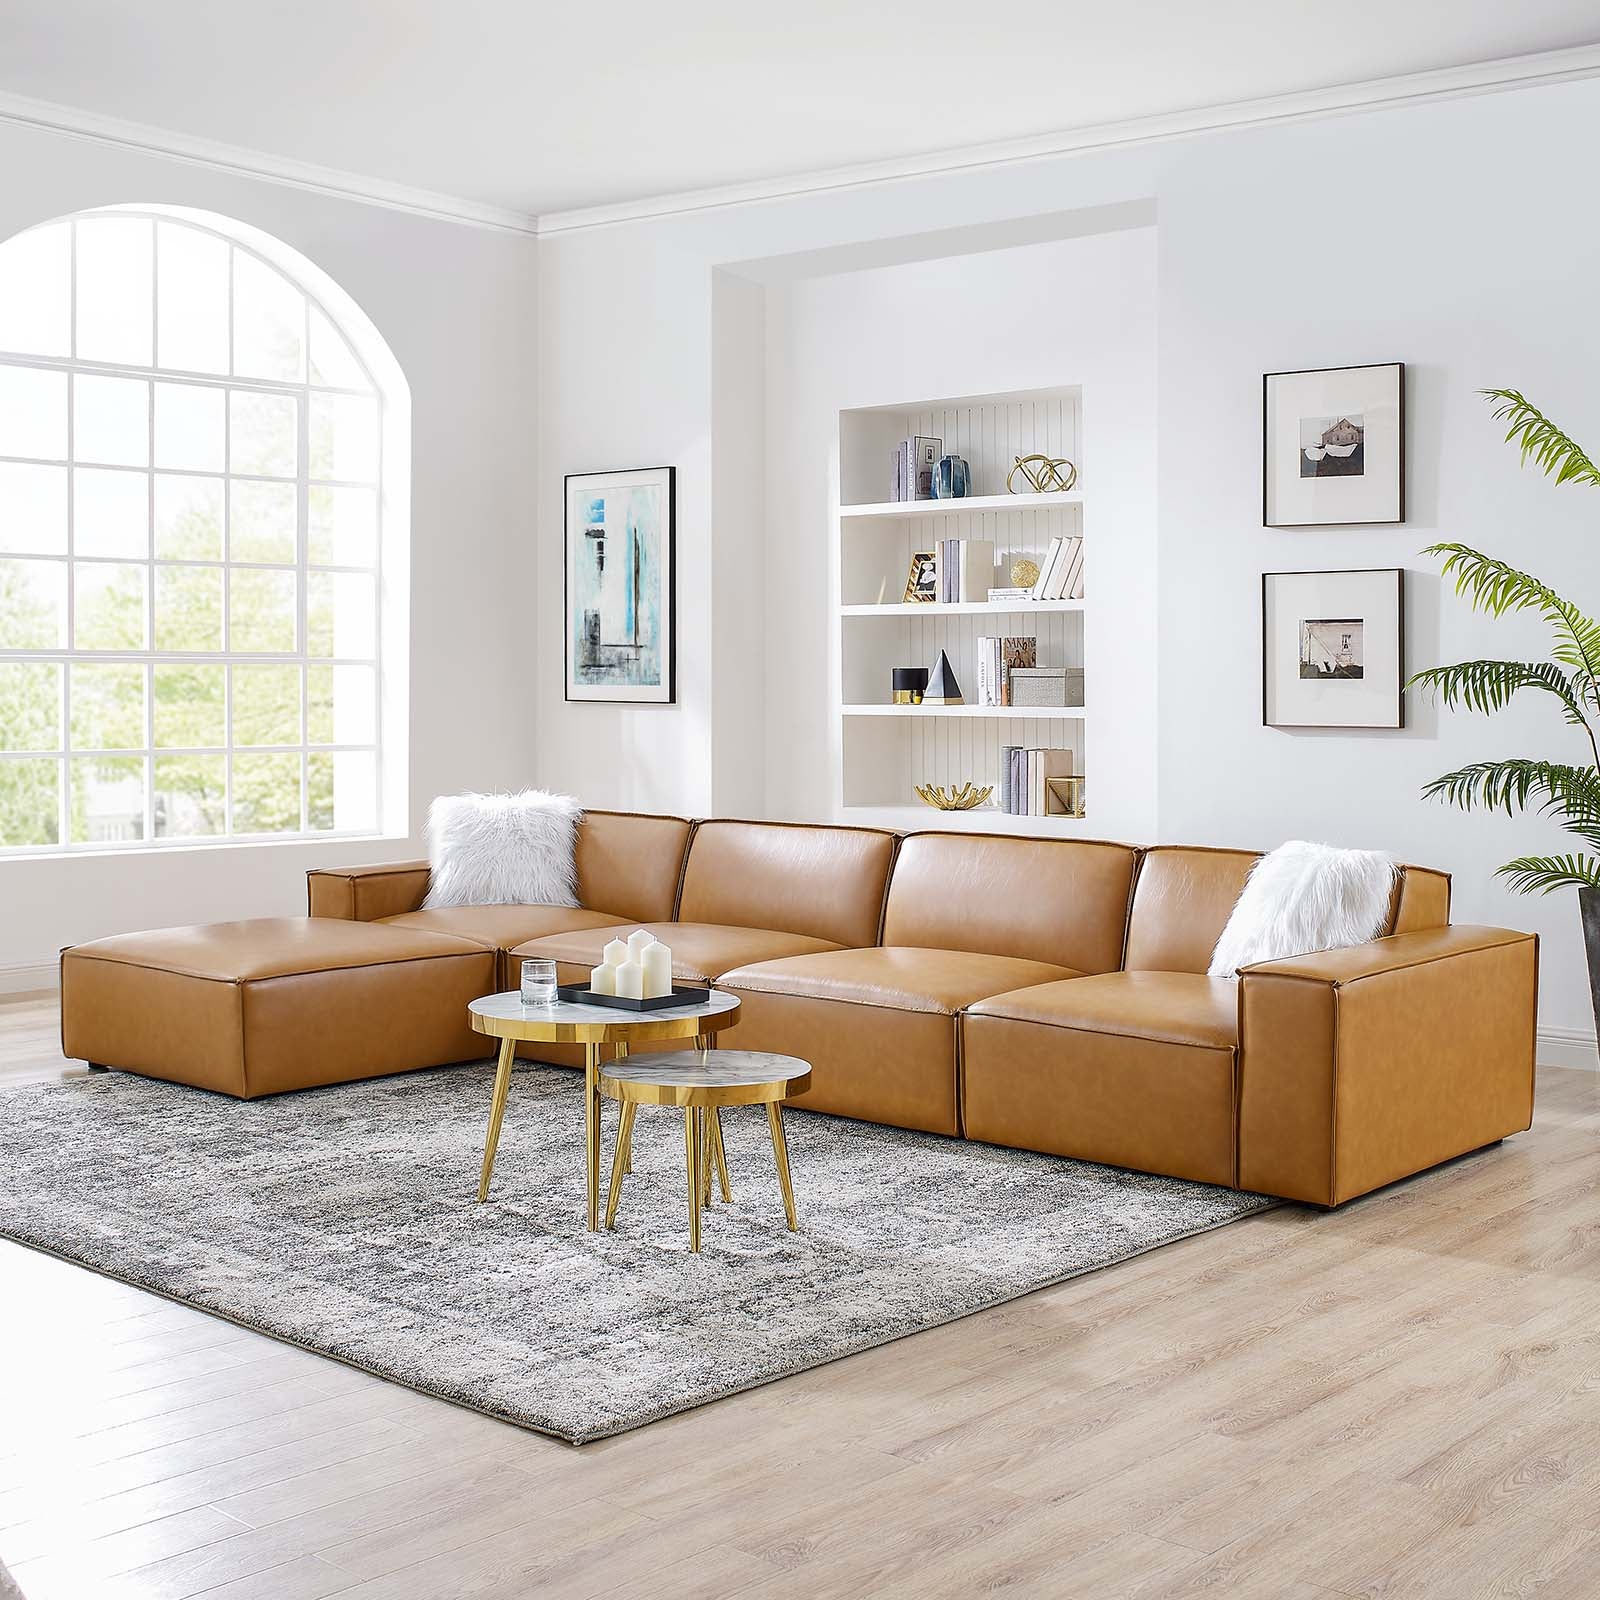 Restore 5-Piece Vegan Leather Sectional Sofa - East Shore Modern Home Furnishings